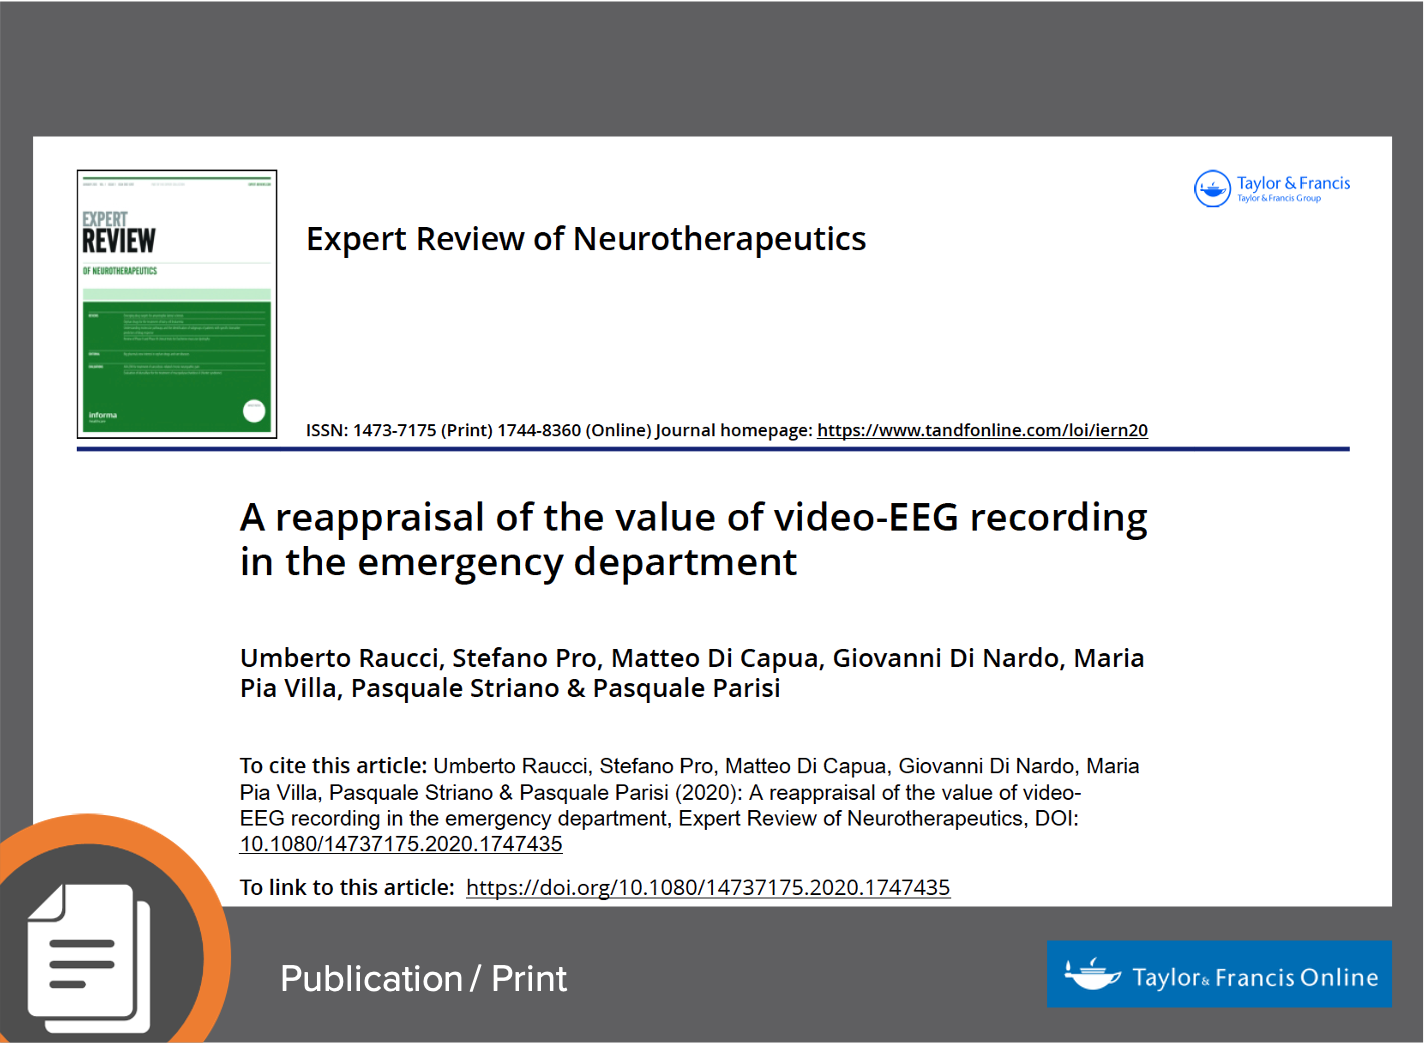 A Reappraisal of the Value of Video-EEG Recording in the Emergency Department